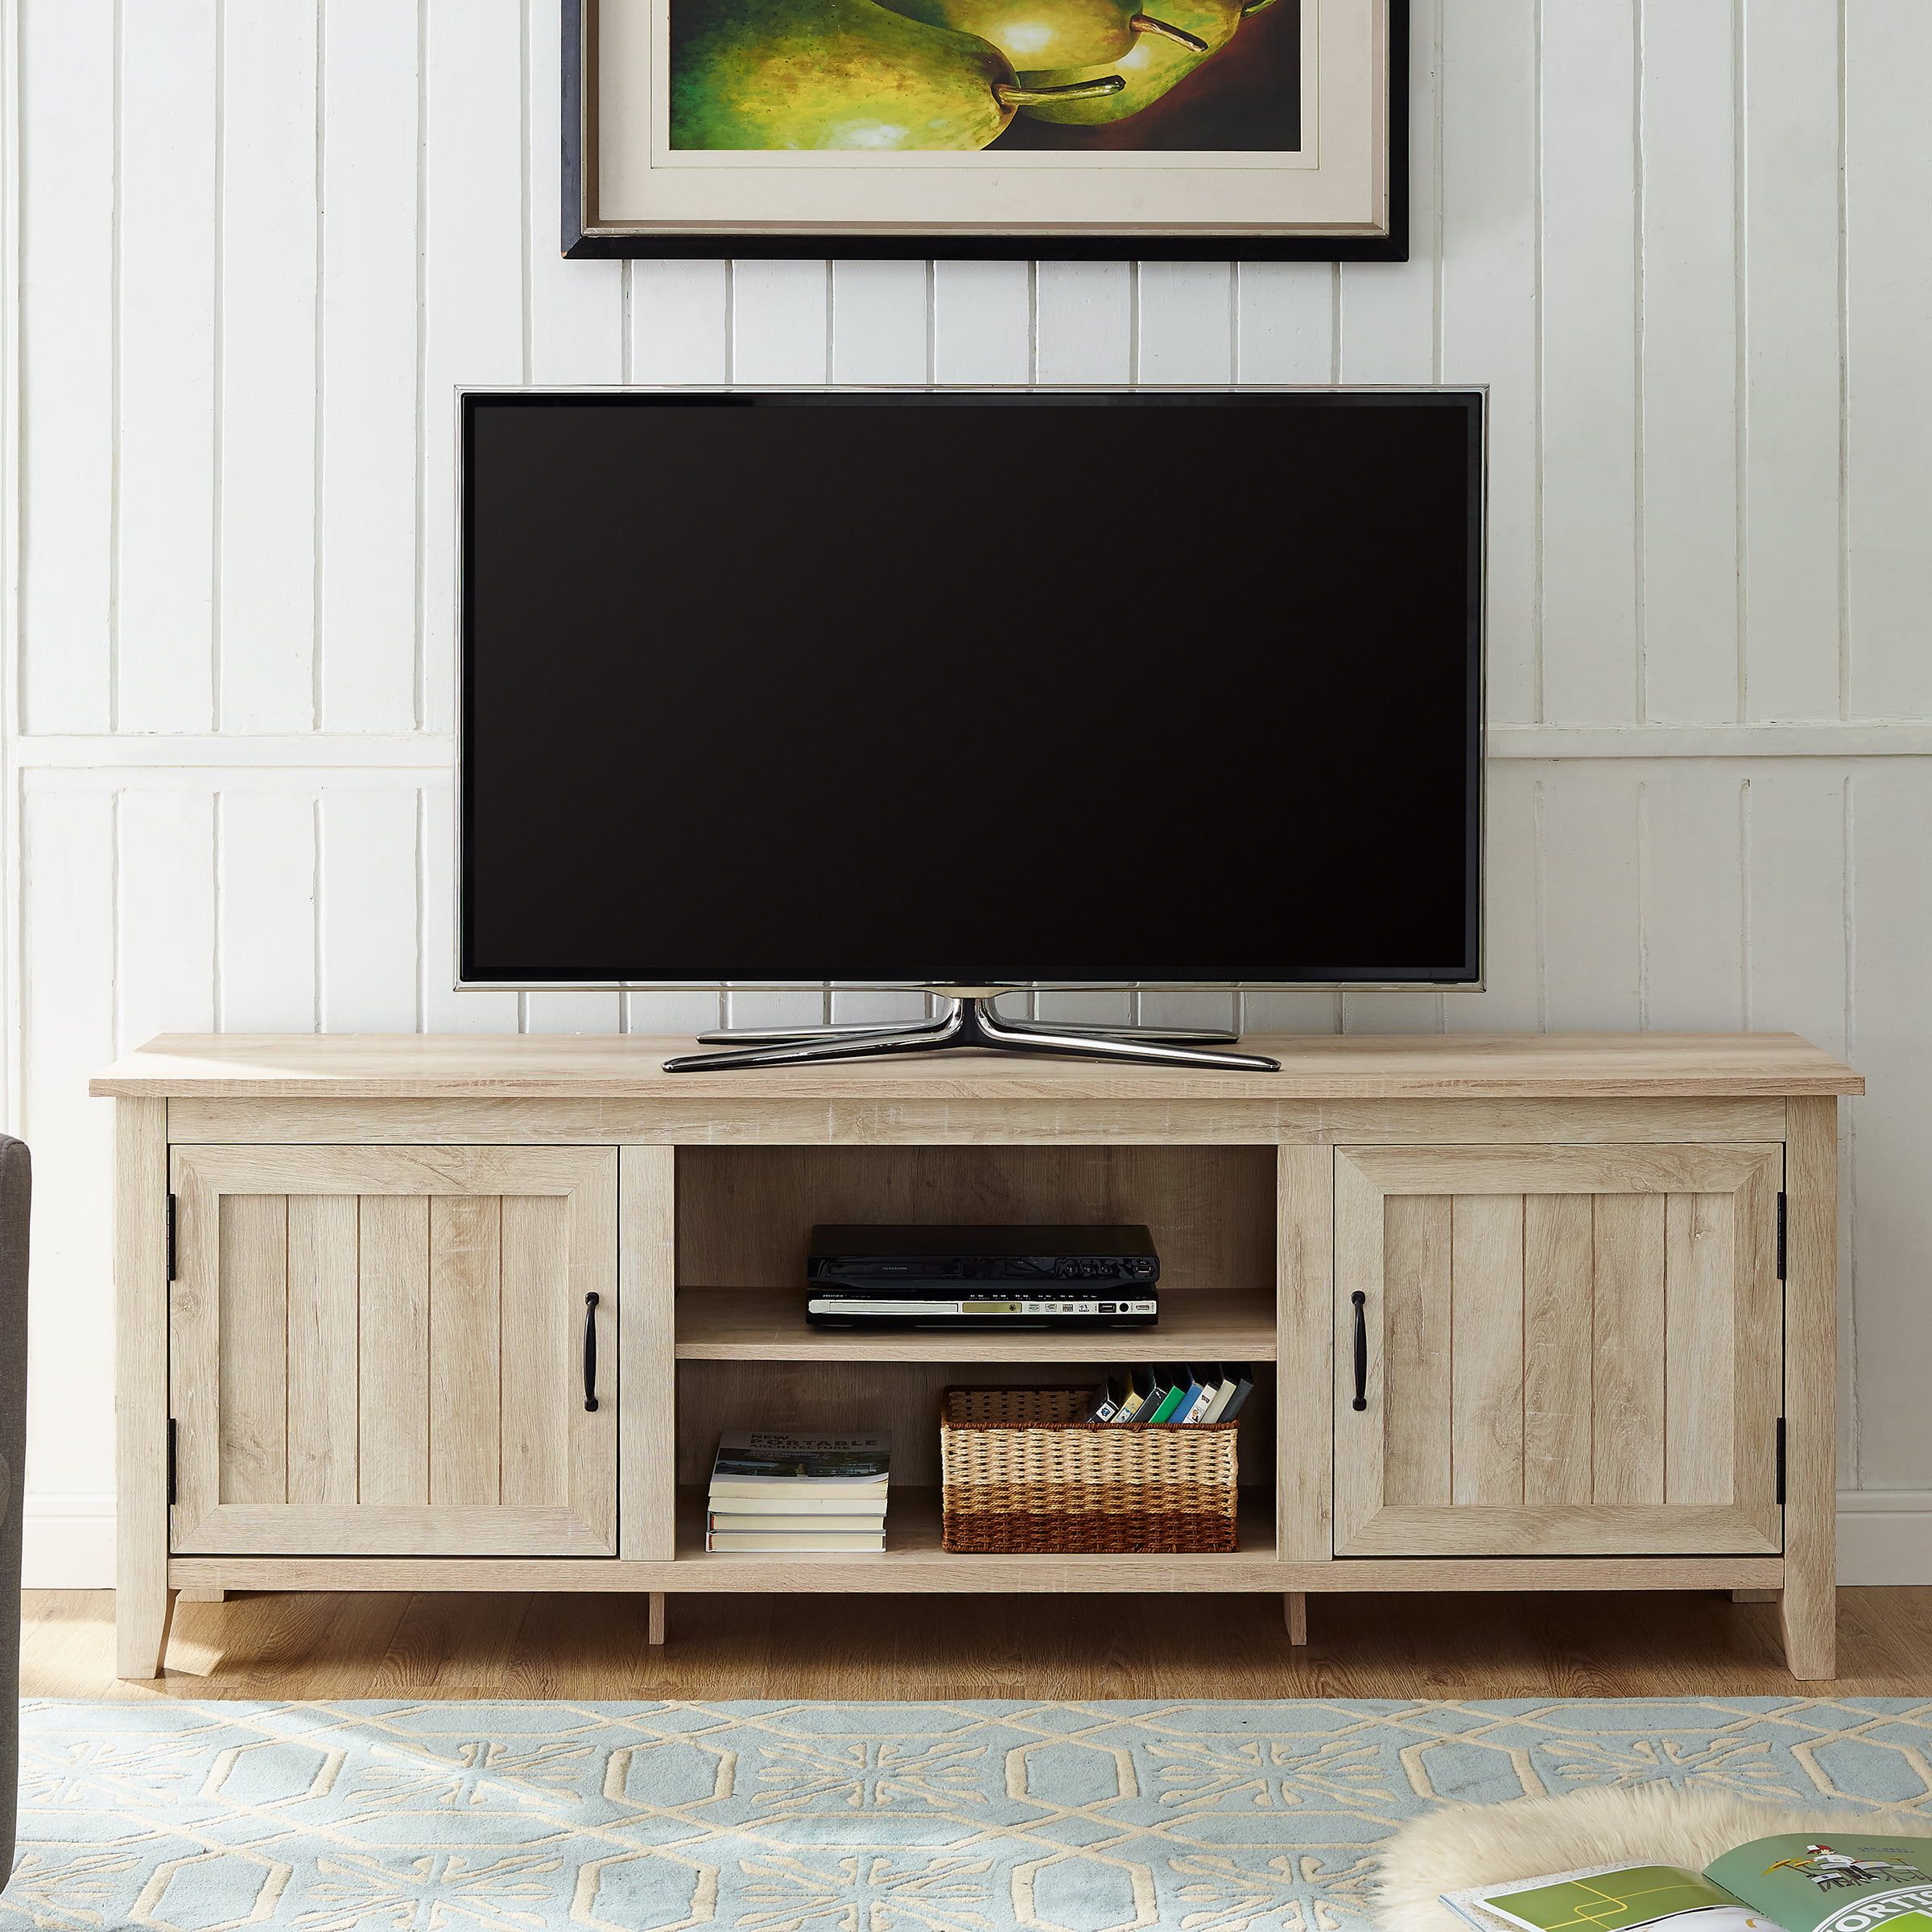 70" Modern Farmhouse Tv Stand Storage Console With Side Bead Board Regarding Farmhouse Tv Stands For 70 Inch Tv (Gallery 6 of 20)